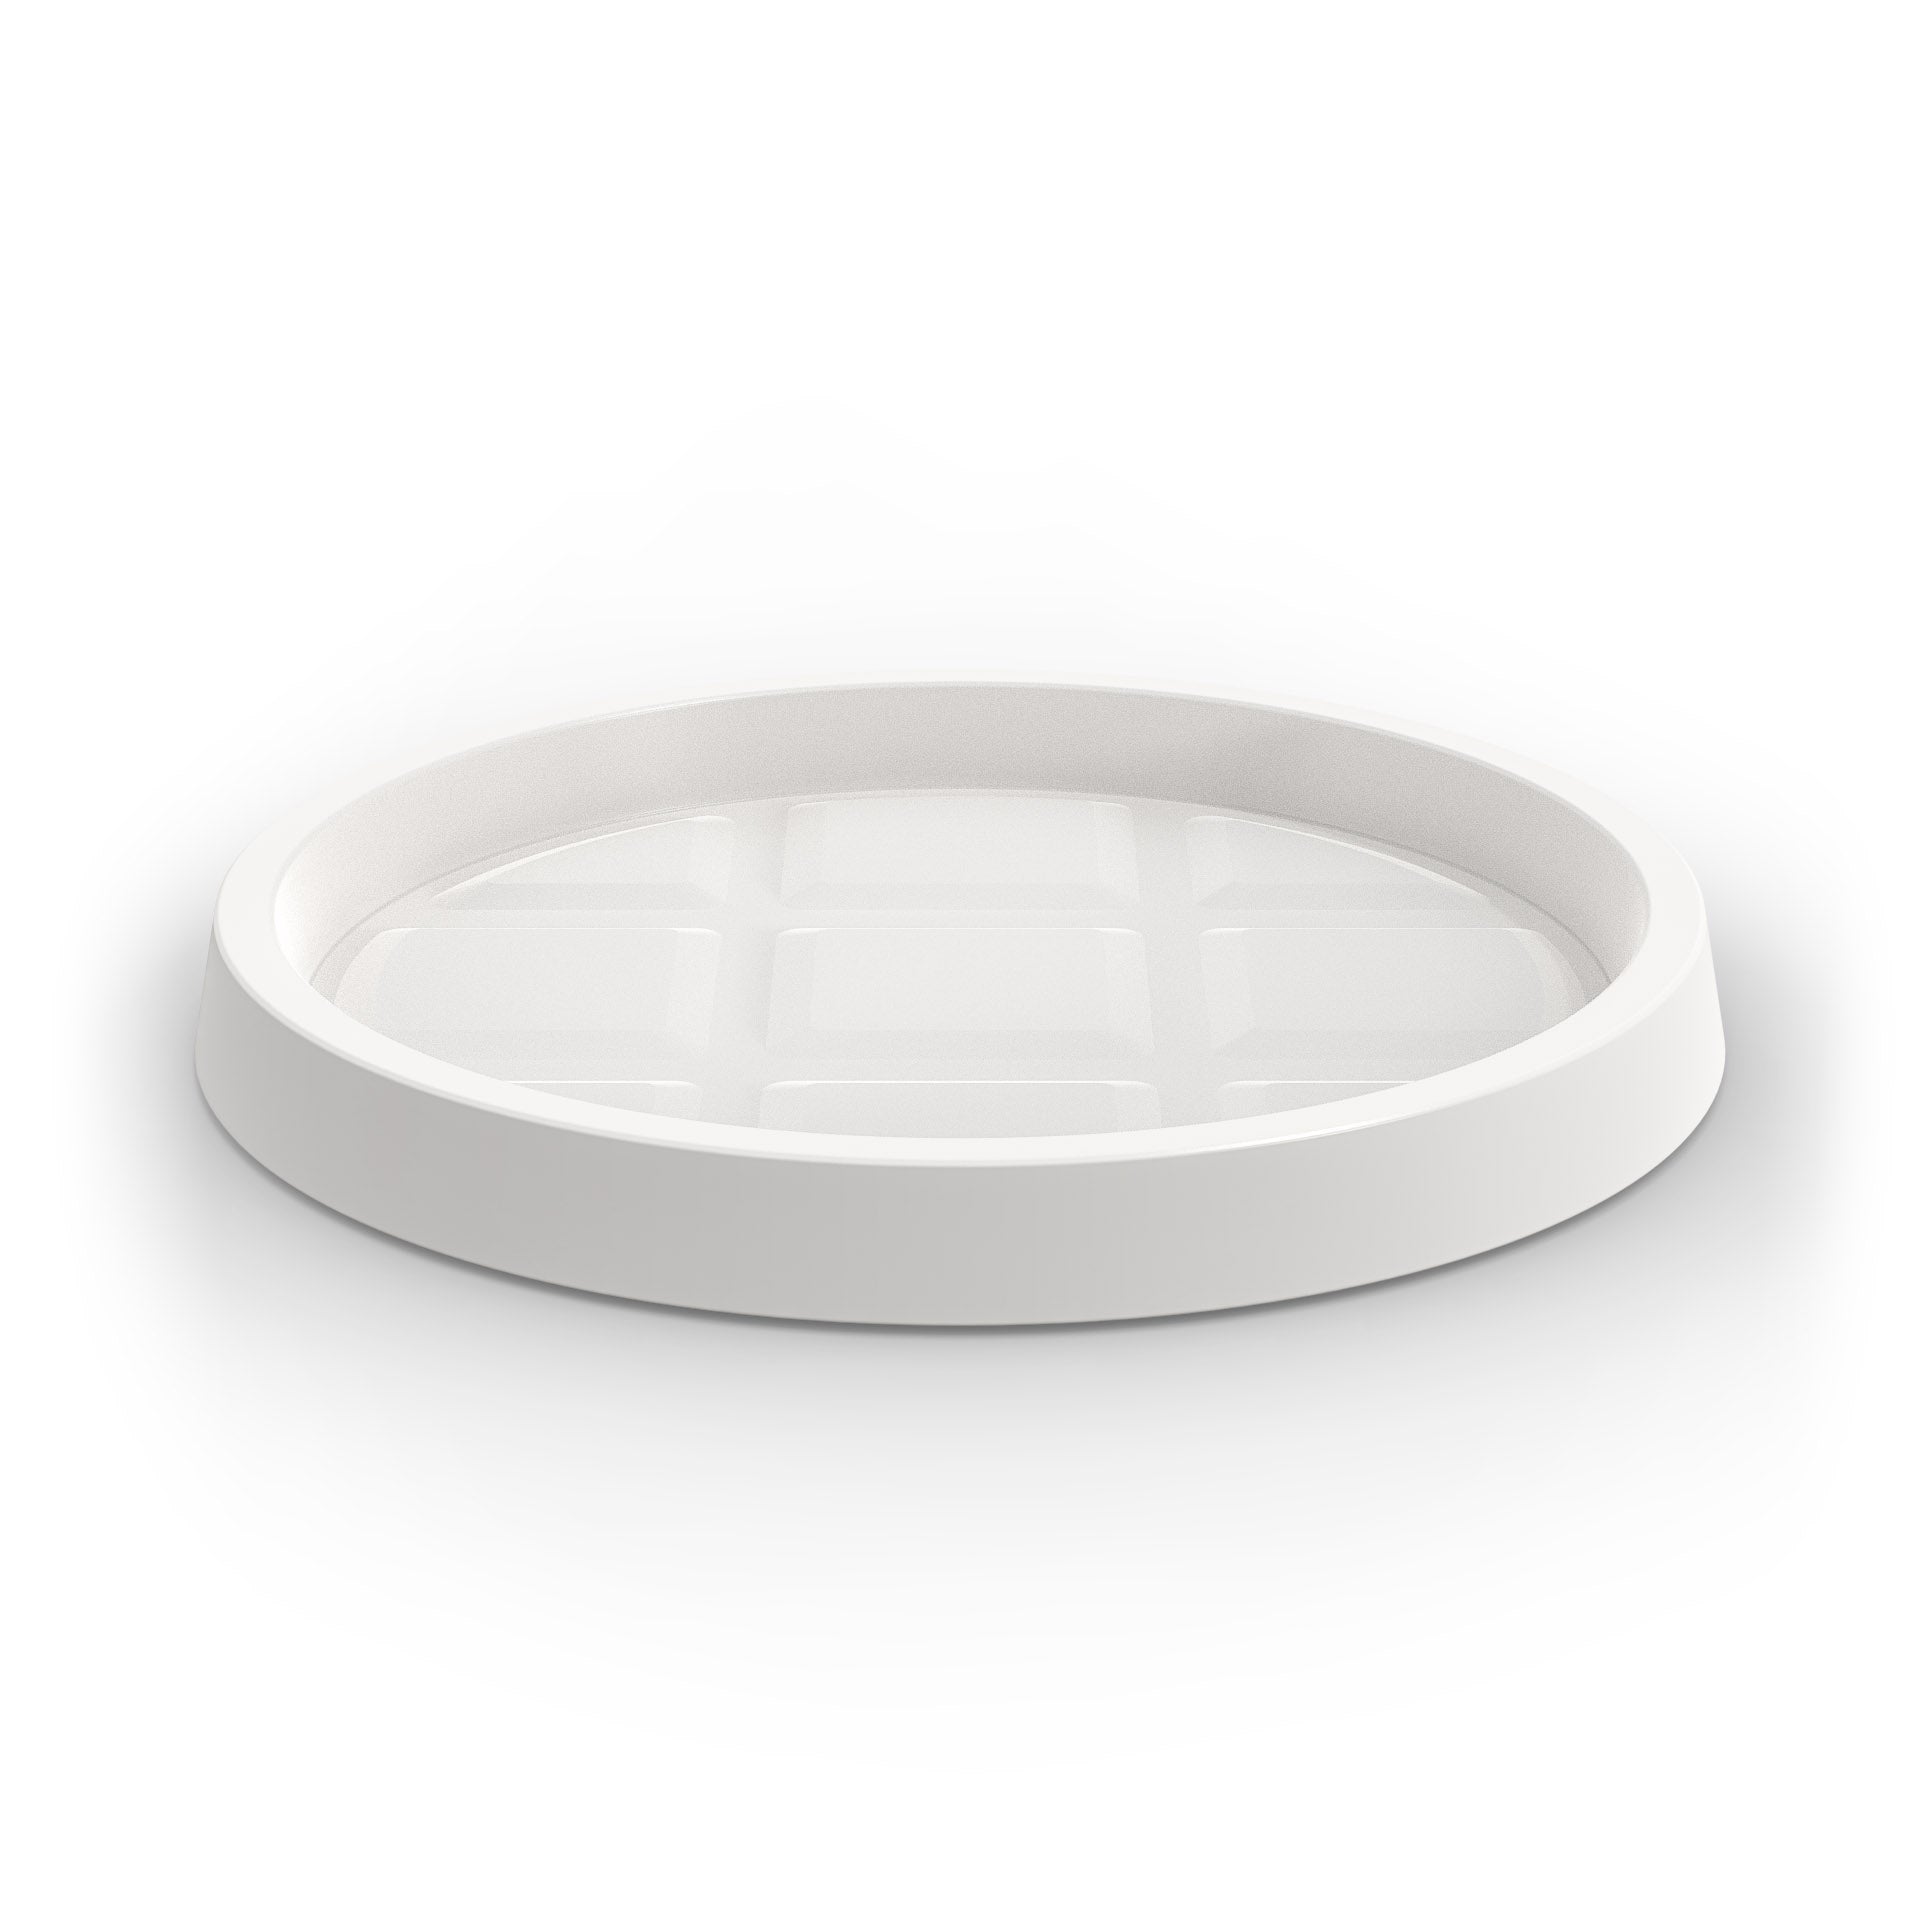 A white saucer for Modscene planters pots. New Zealand made.